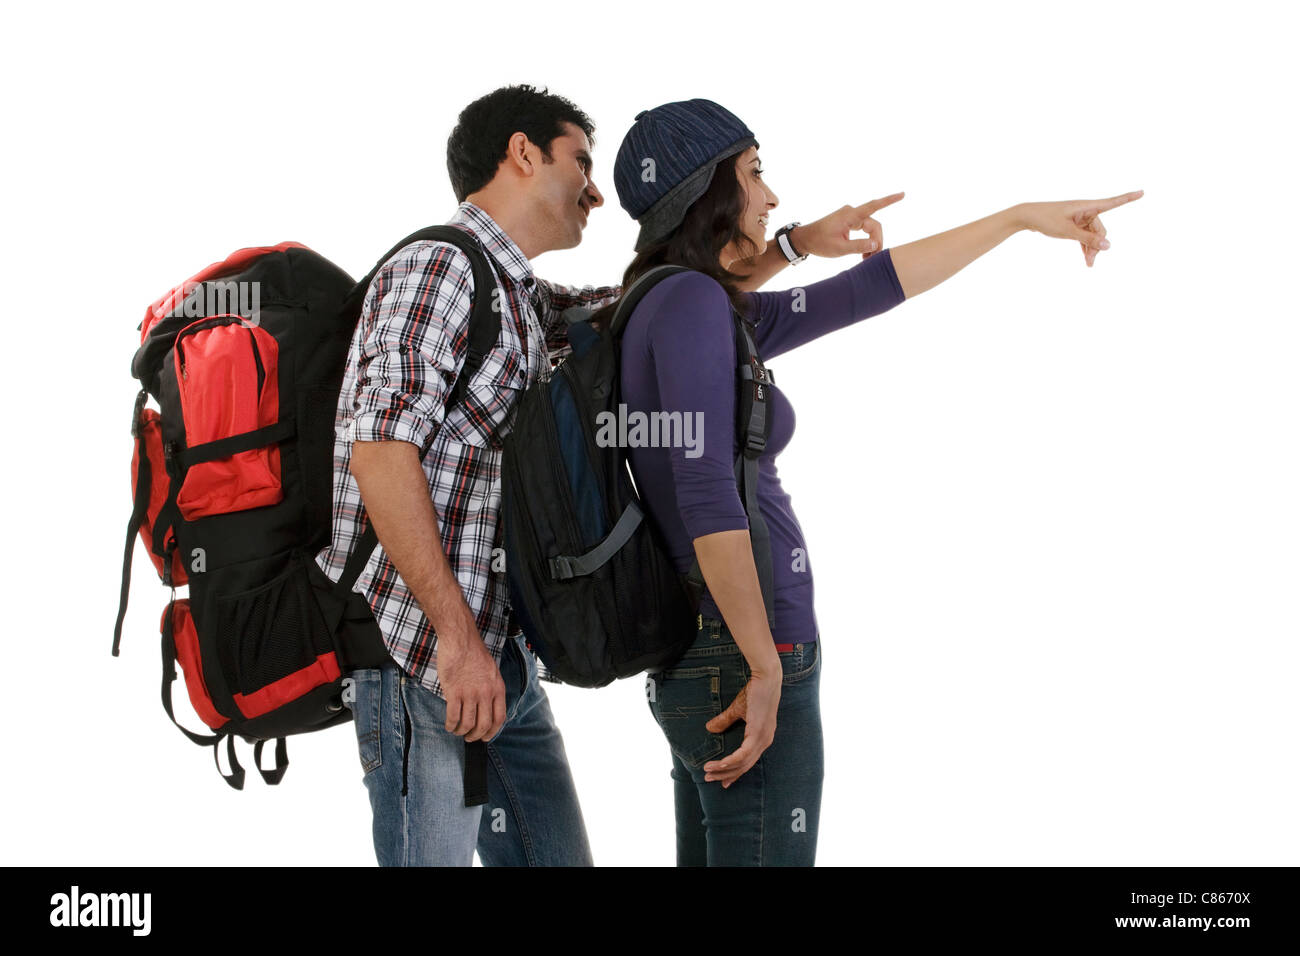 Couple in hiking gear pointing Stock Photo